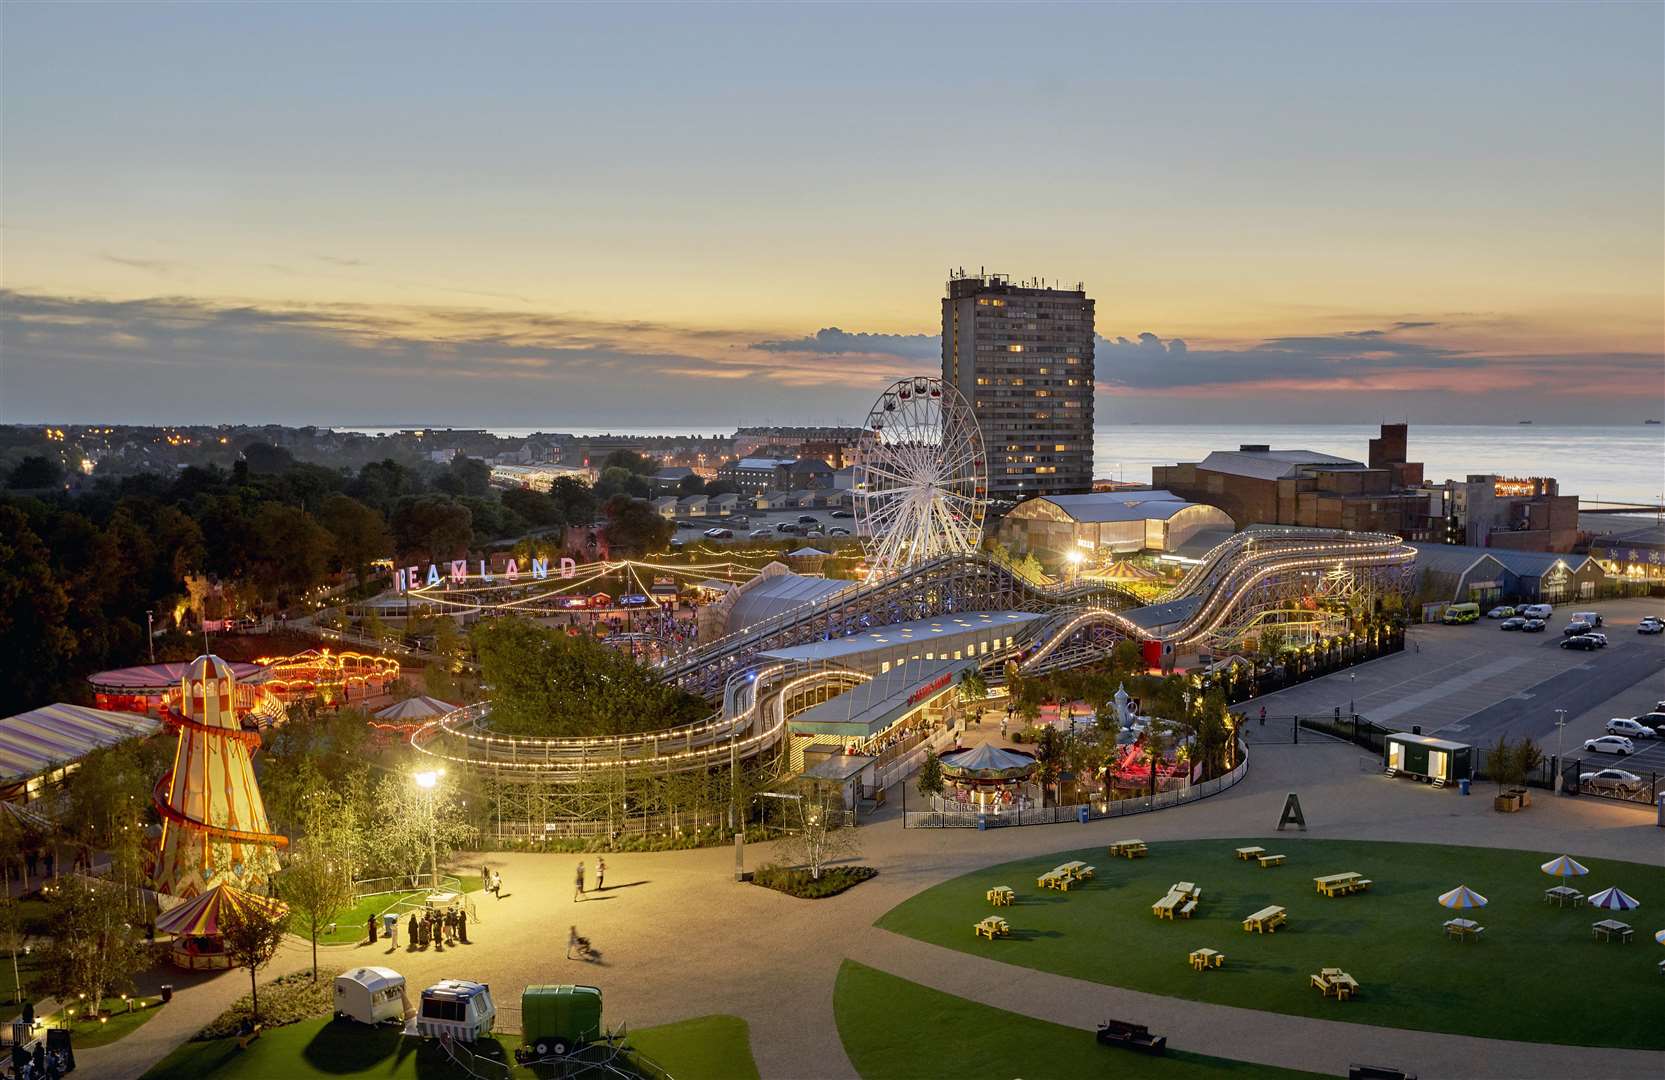 Dreamland chief executive Eddie Kemsley said the plans were good for the amusement park to welcome overnight guests